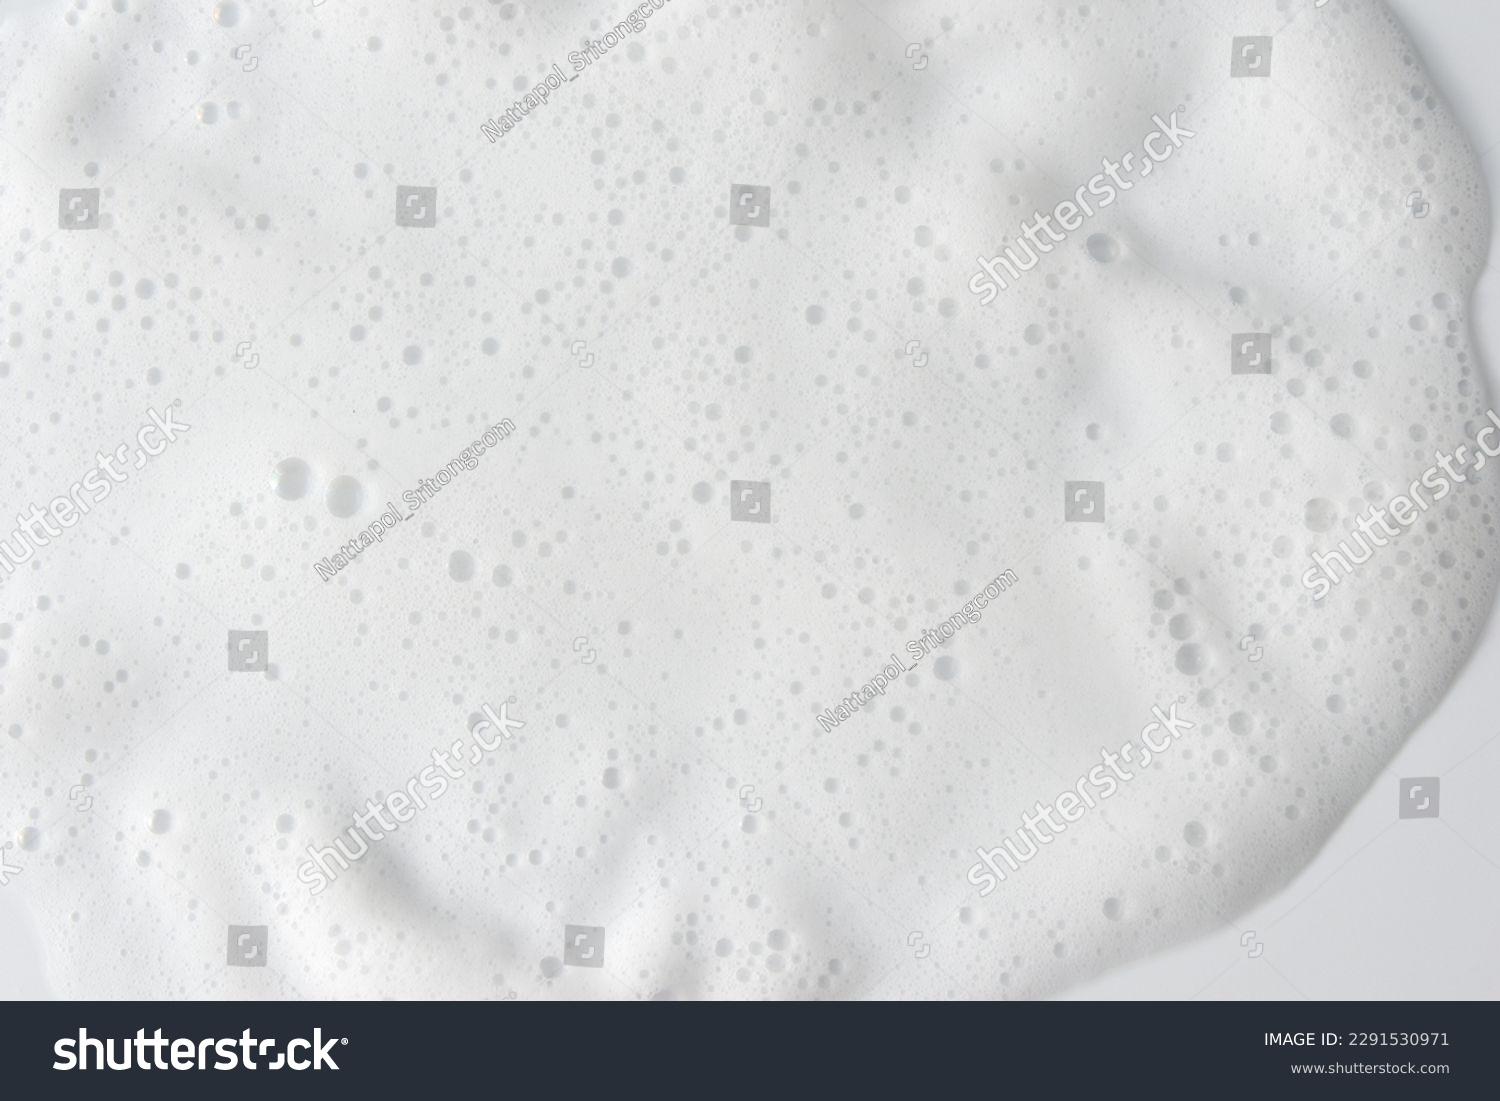 Abstract background white soapy foam texture. Shampoo foam with bubbles #2291530971